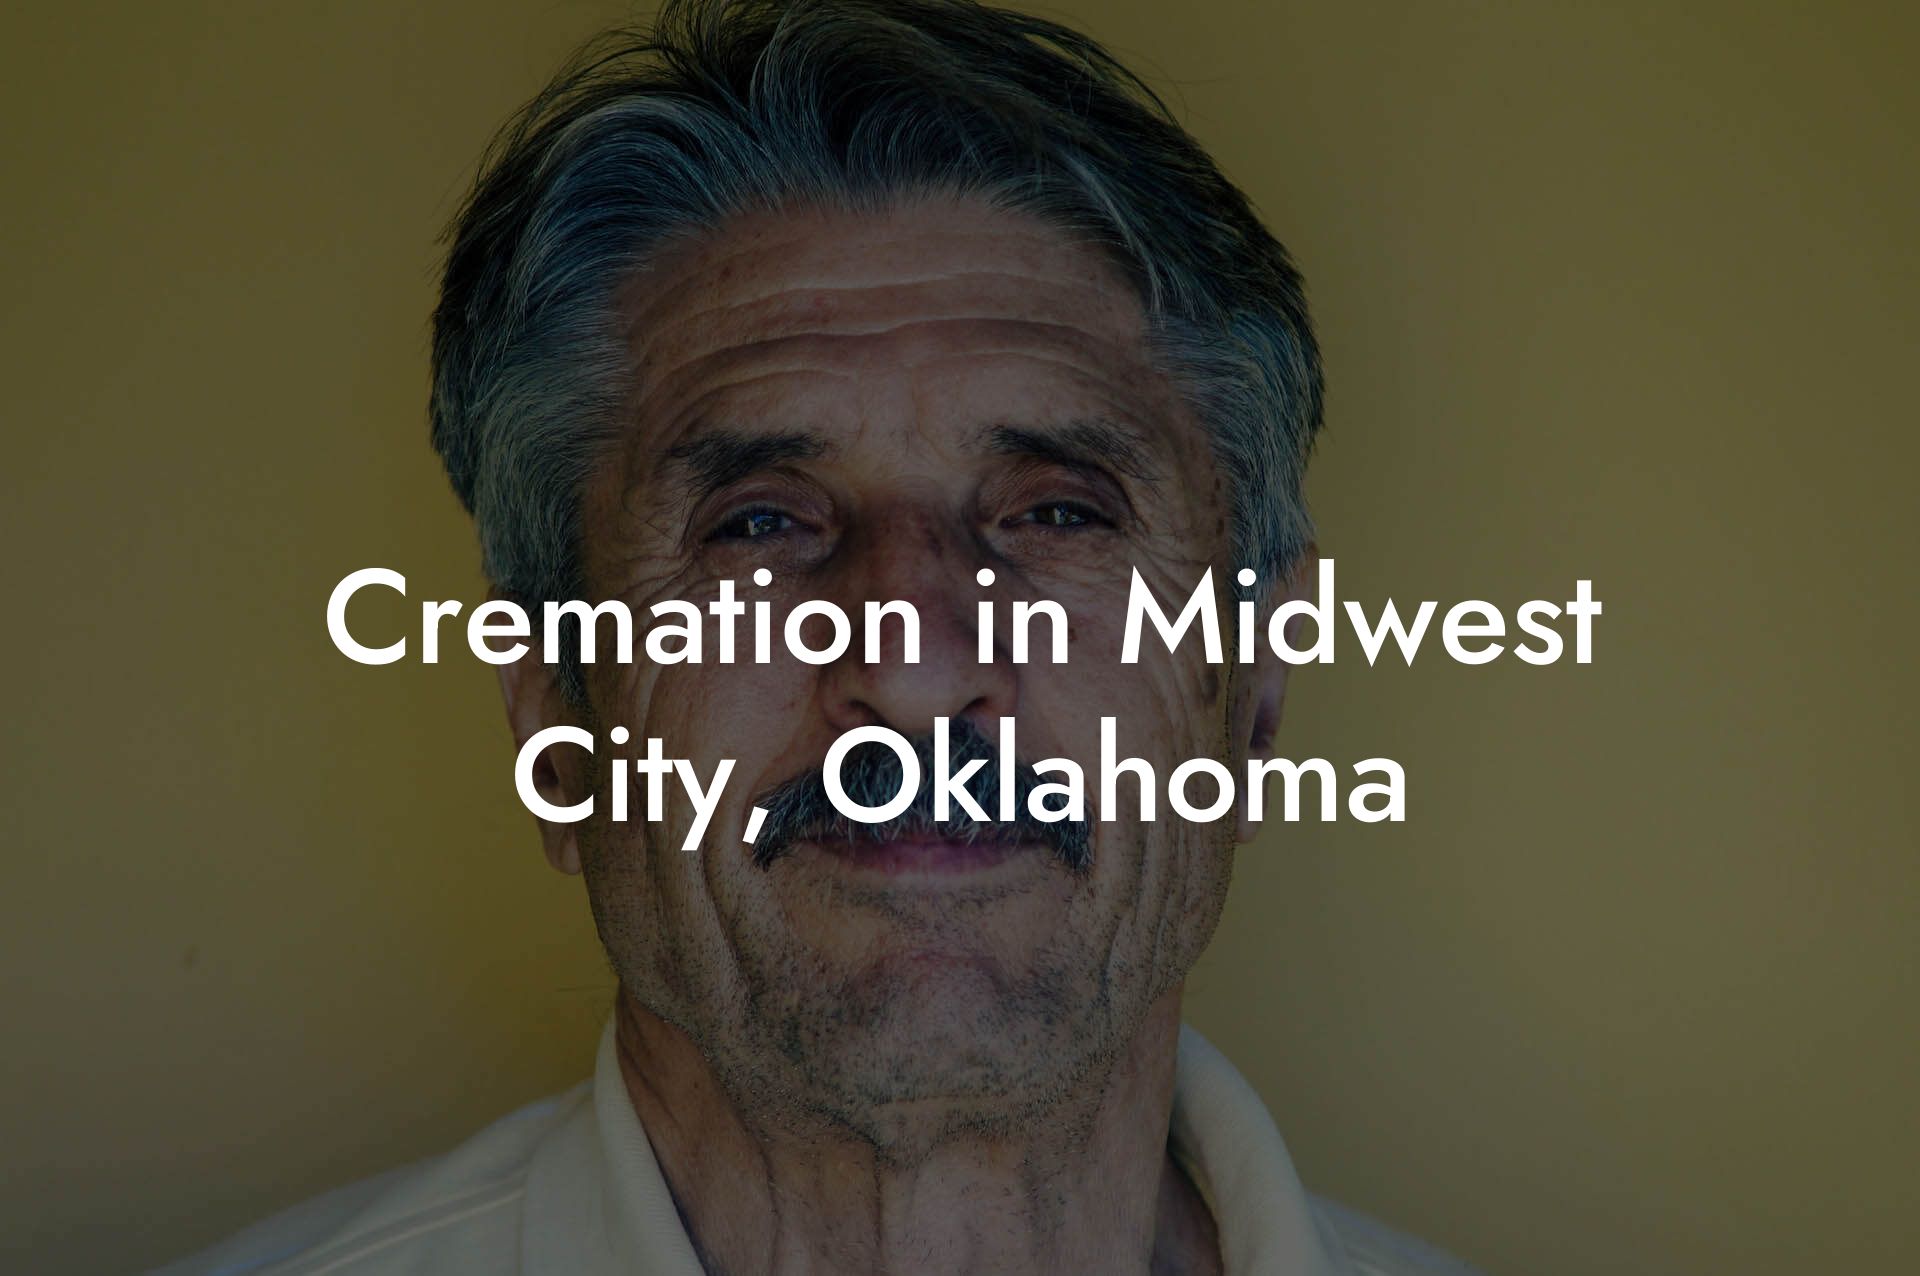 Cremation in Midwest City, Oklahoma